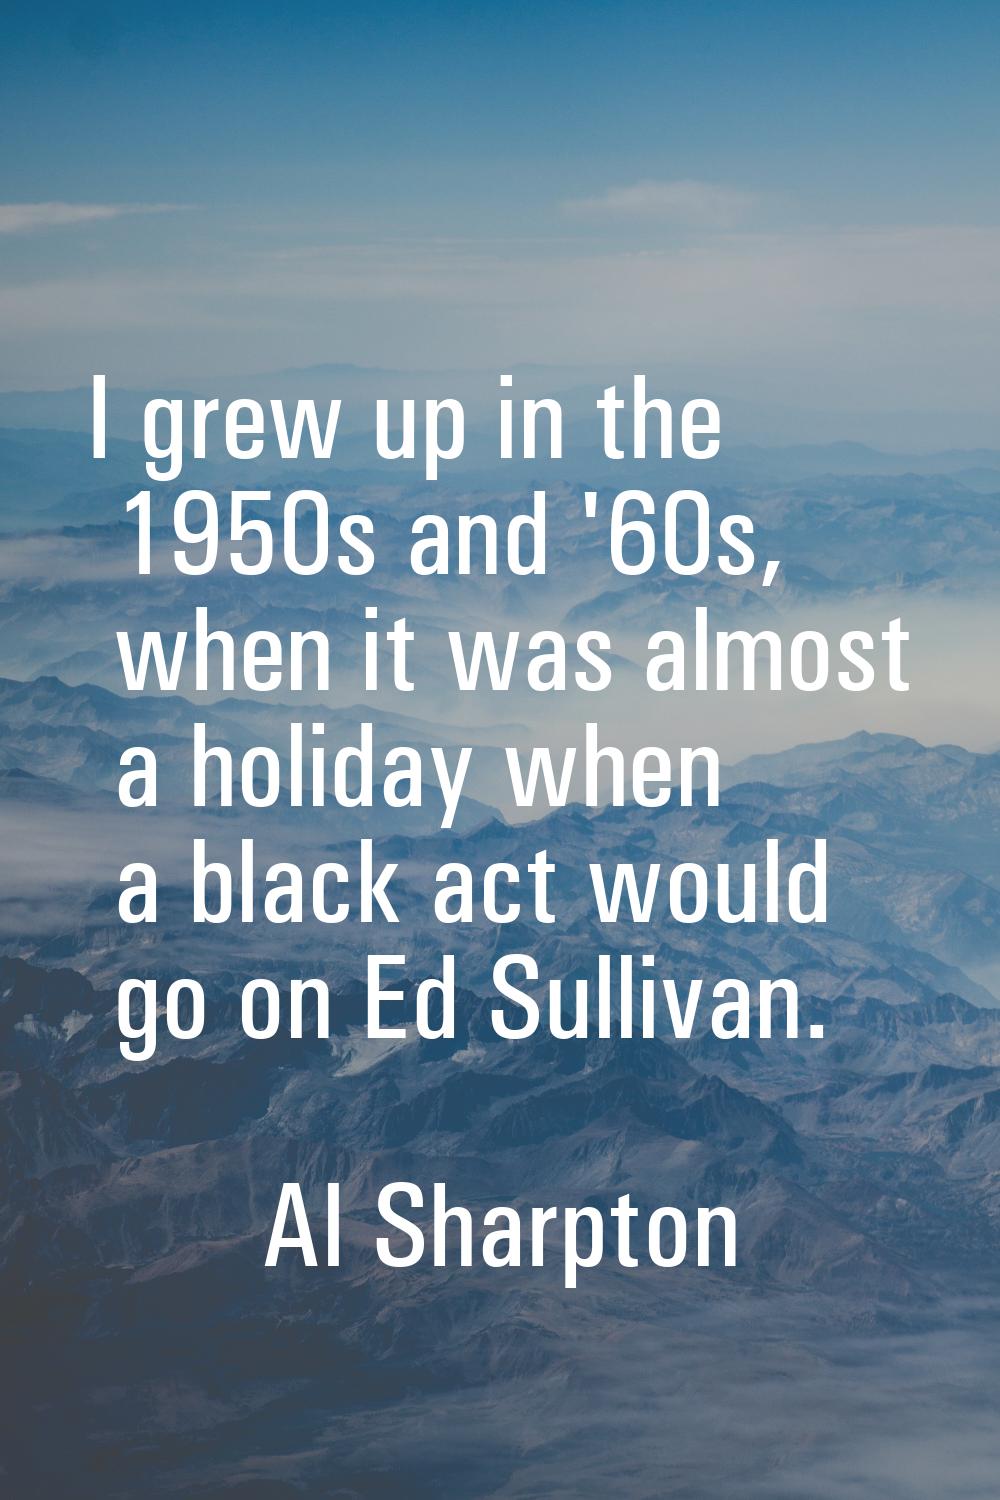 I grew up in the 1950s and '60s, when it was almost a holiday when a black act would go on Ed Sulli